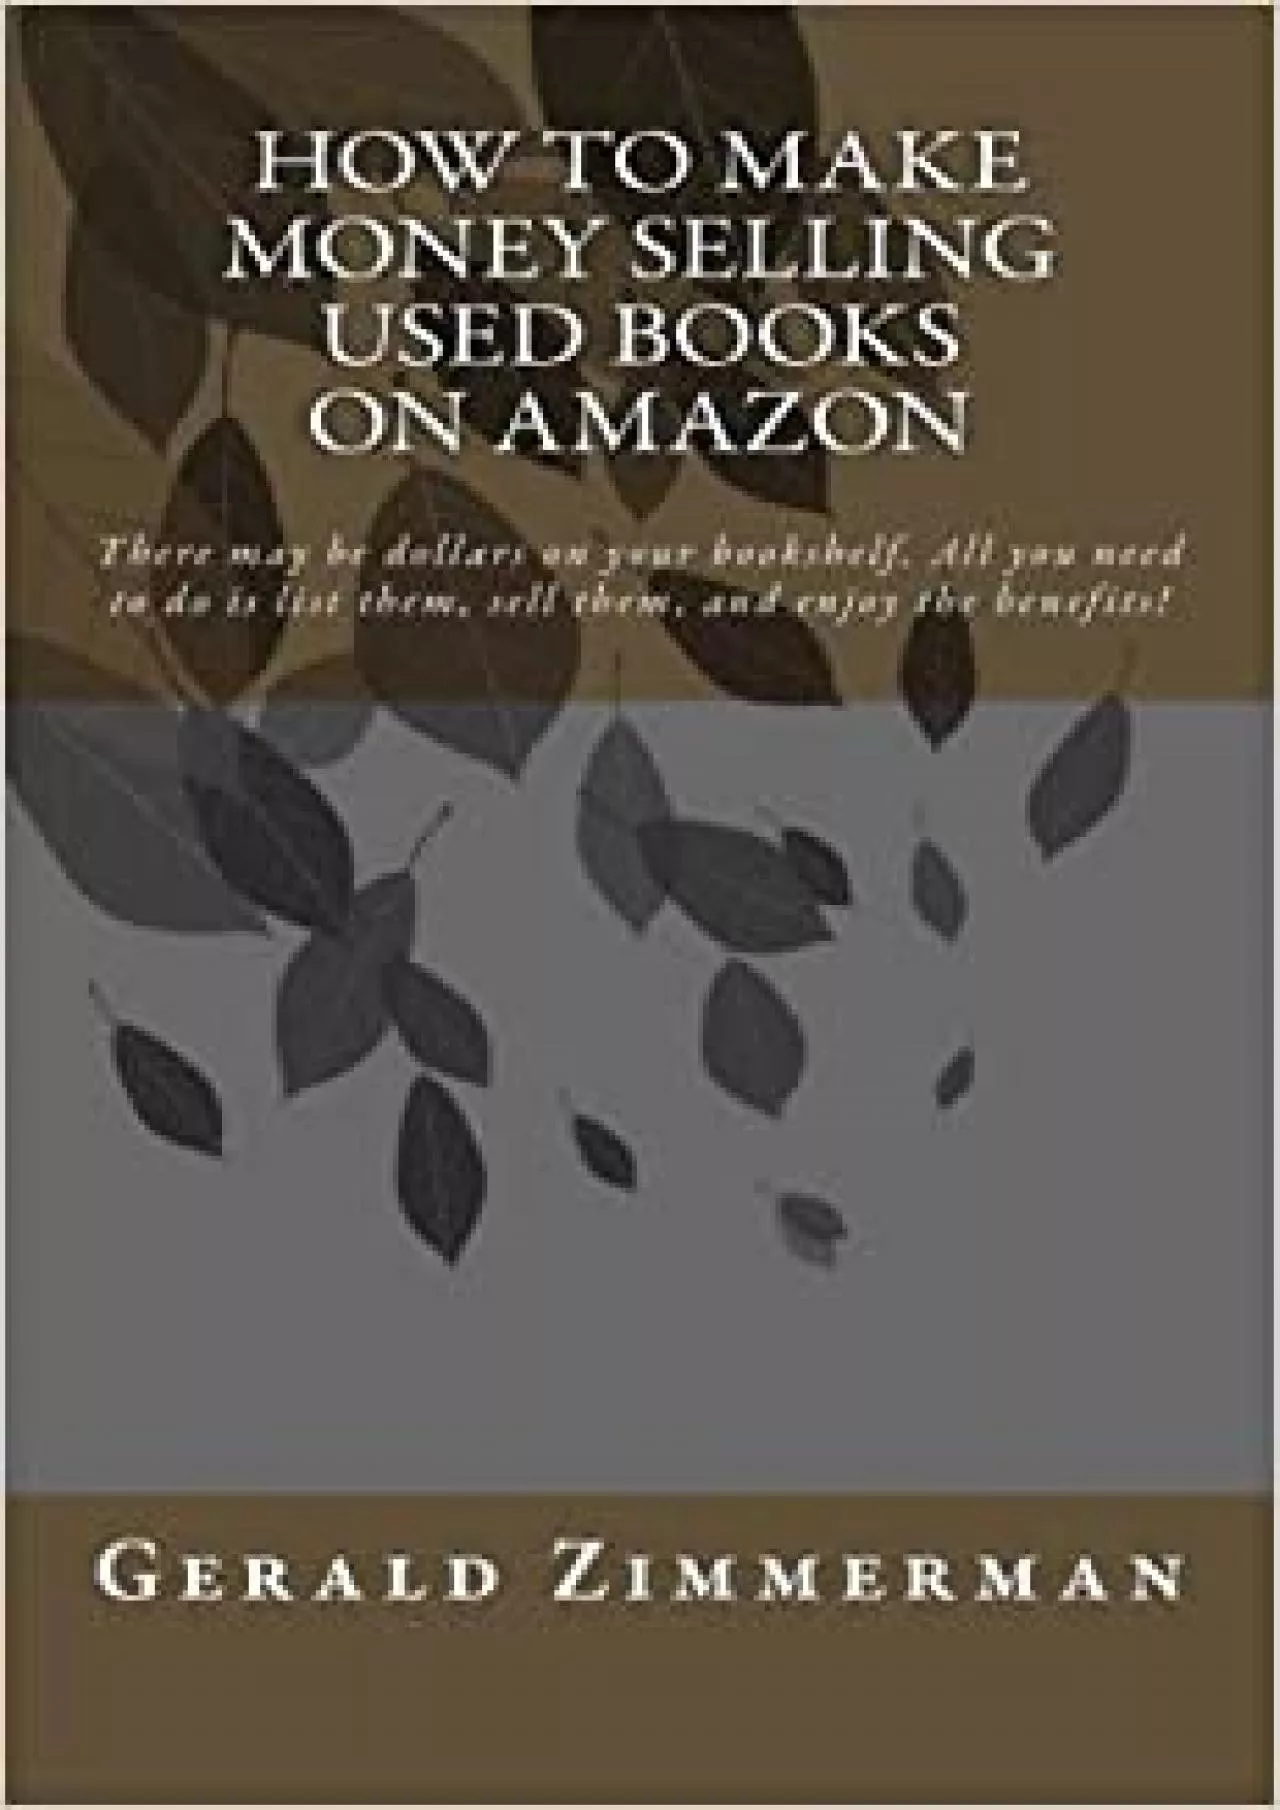 How To Make Money Selling Used Books On Amazon There may be dollars on your bookshelf